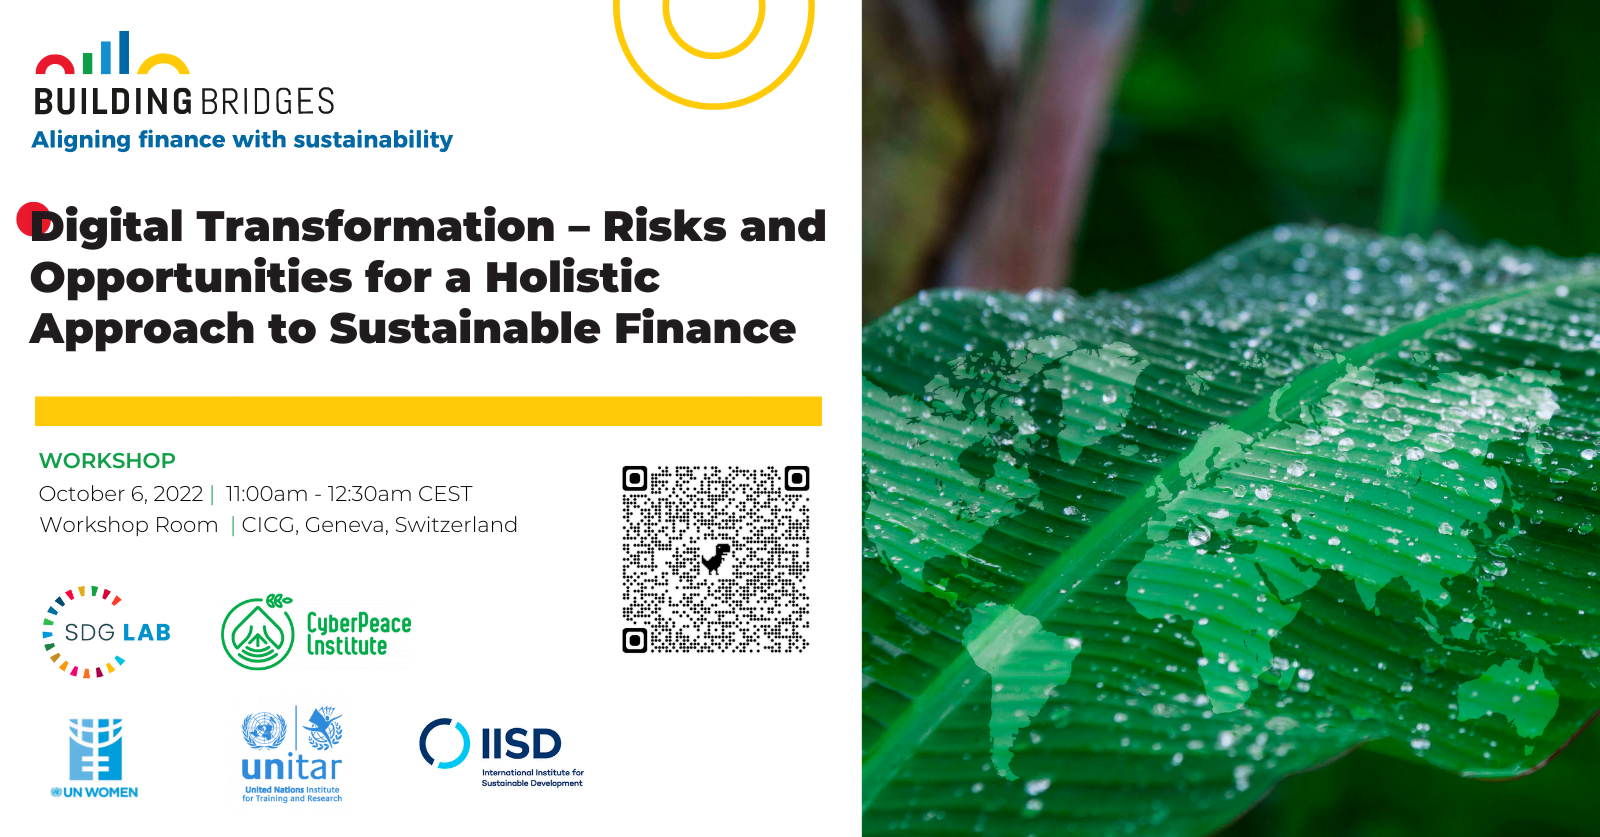 Digital Transformation – Risks and Opportunities for a Holistic Approach to Sustainable Finance